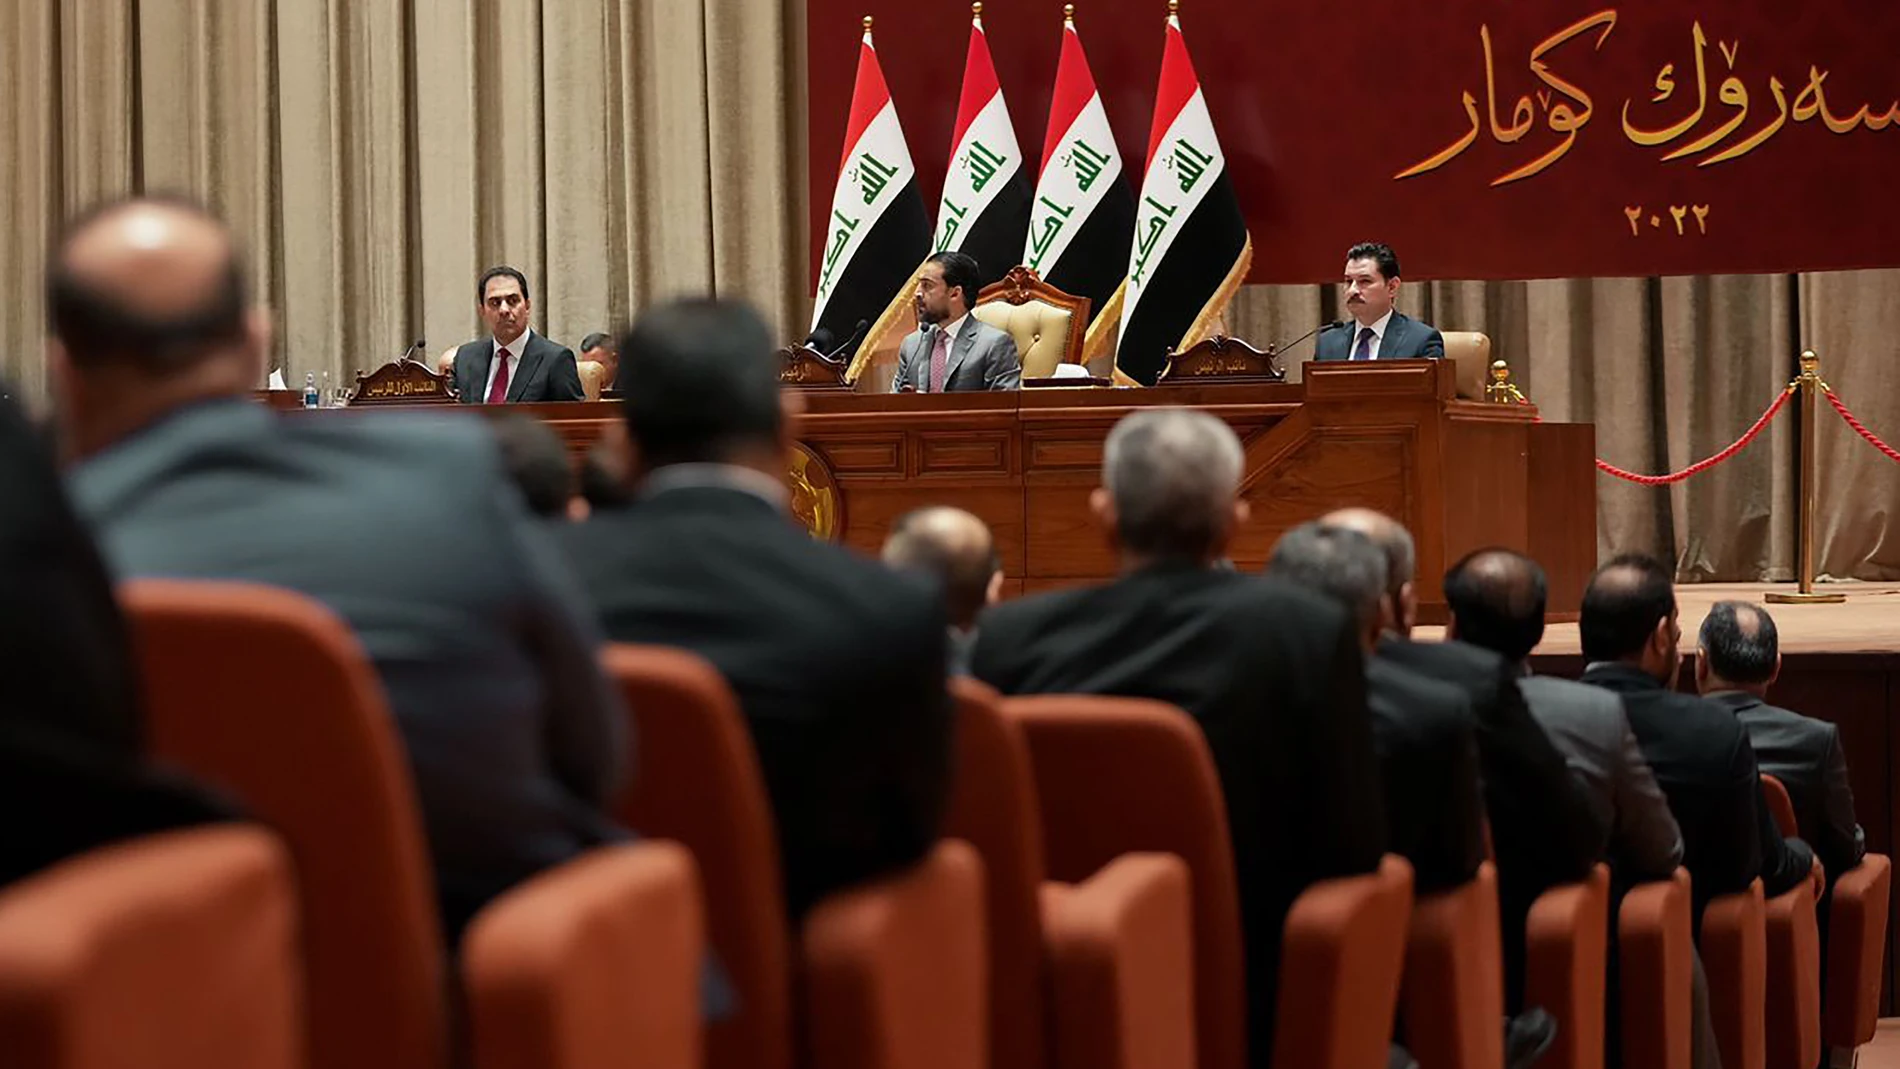 BAGHDAD, Oct. 13, 2022 -- Lawmakers attend a parliament session in Baghdad, Iraq, on Oct. 13, 2022. Iraqi lawmakers on Thursday elected Abdul Latif Rashid as the new president of Iraq, marking a crucial step toward forming a new government for the country, the parliament said. (Foto de ARCHIVO)13/10/2022